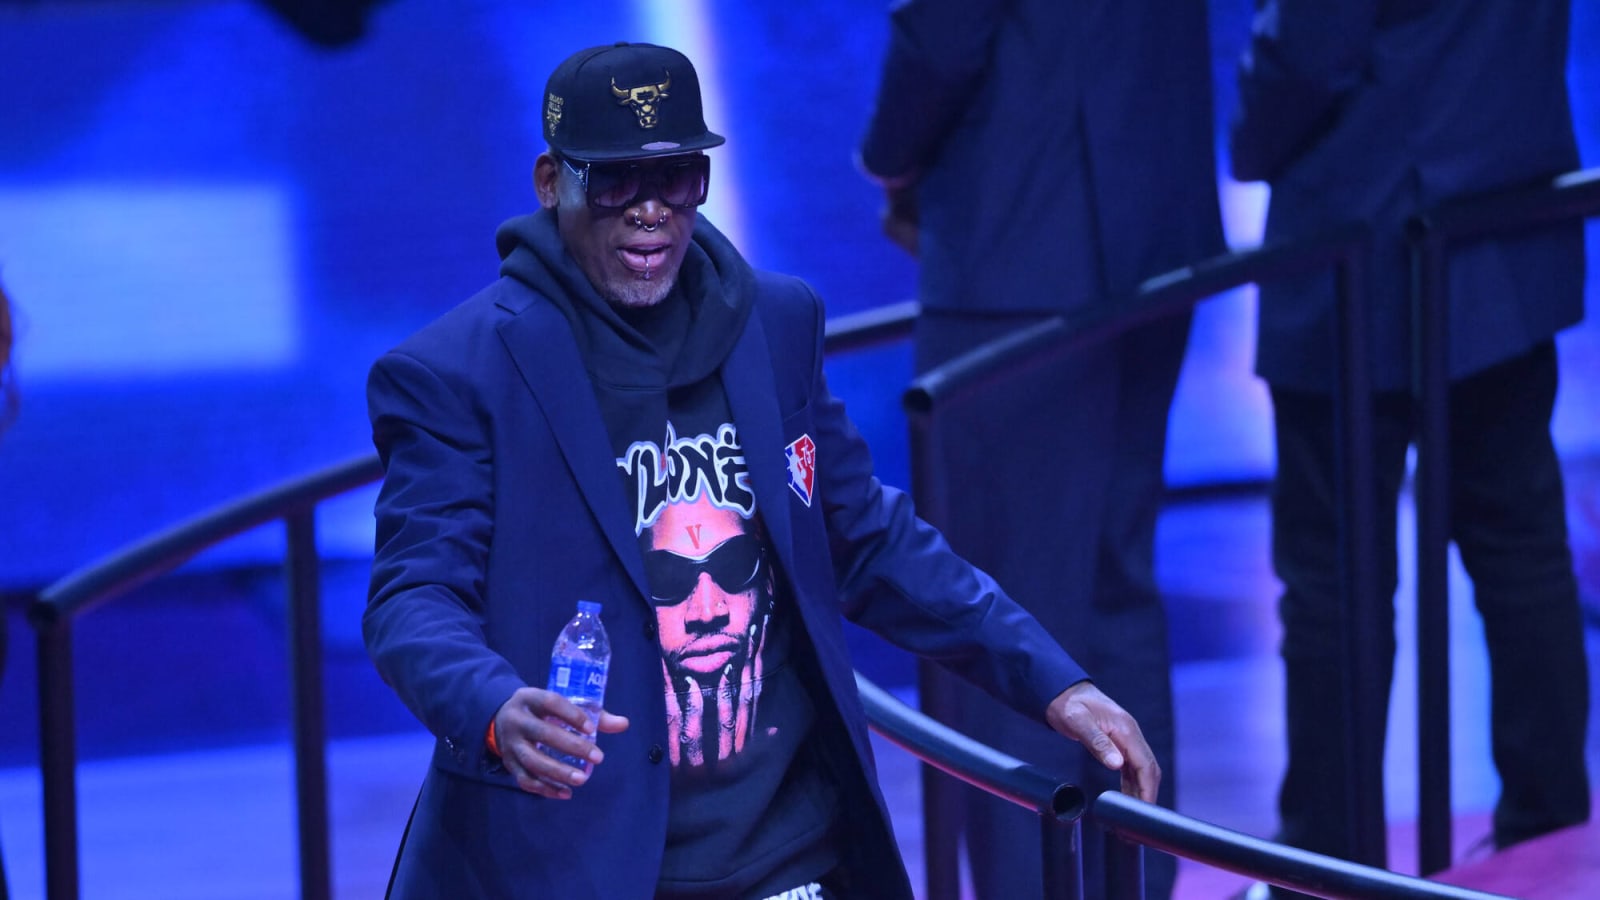 Dennis Rodman Revealed He Would Go To Party In Las Vegas 20-25 Times During The NBA Season: "We Had A Plane, I&#39;d Just Go To Vegas And Come Back The Next Night."